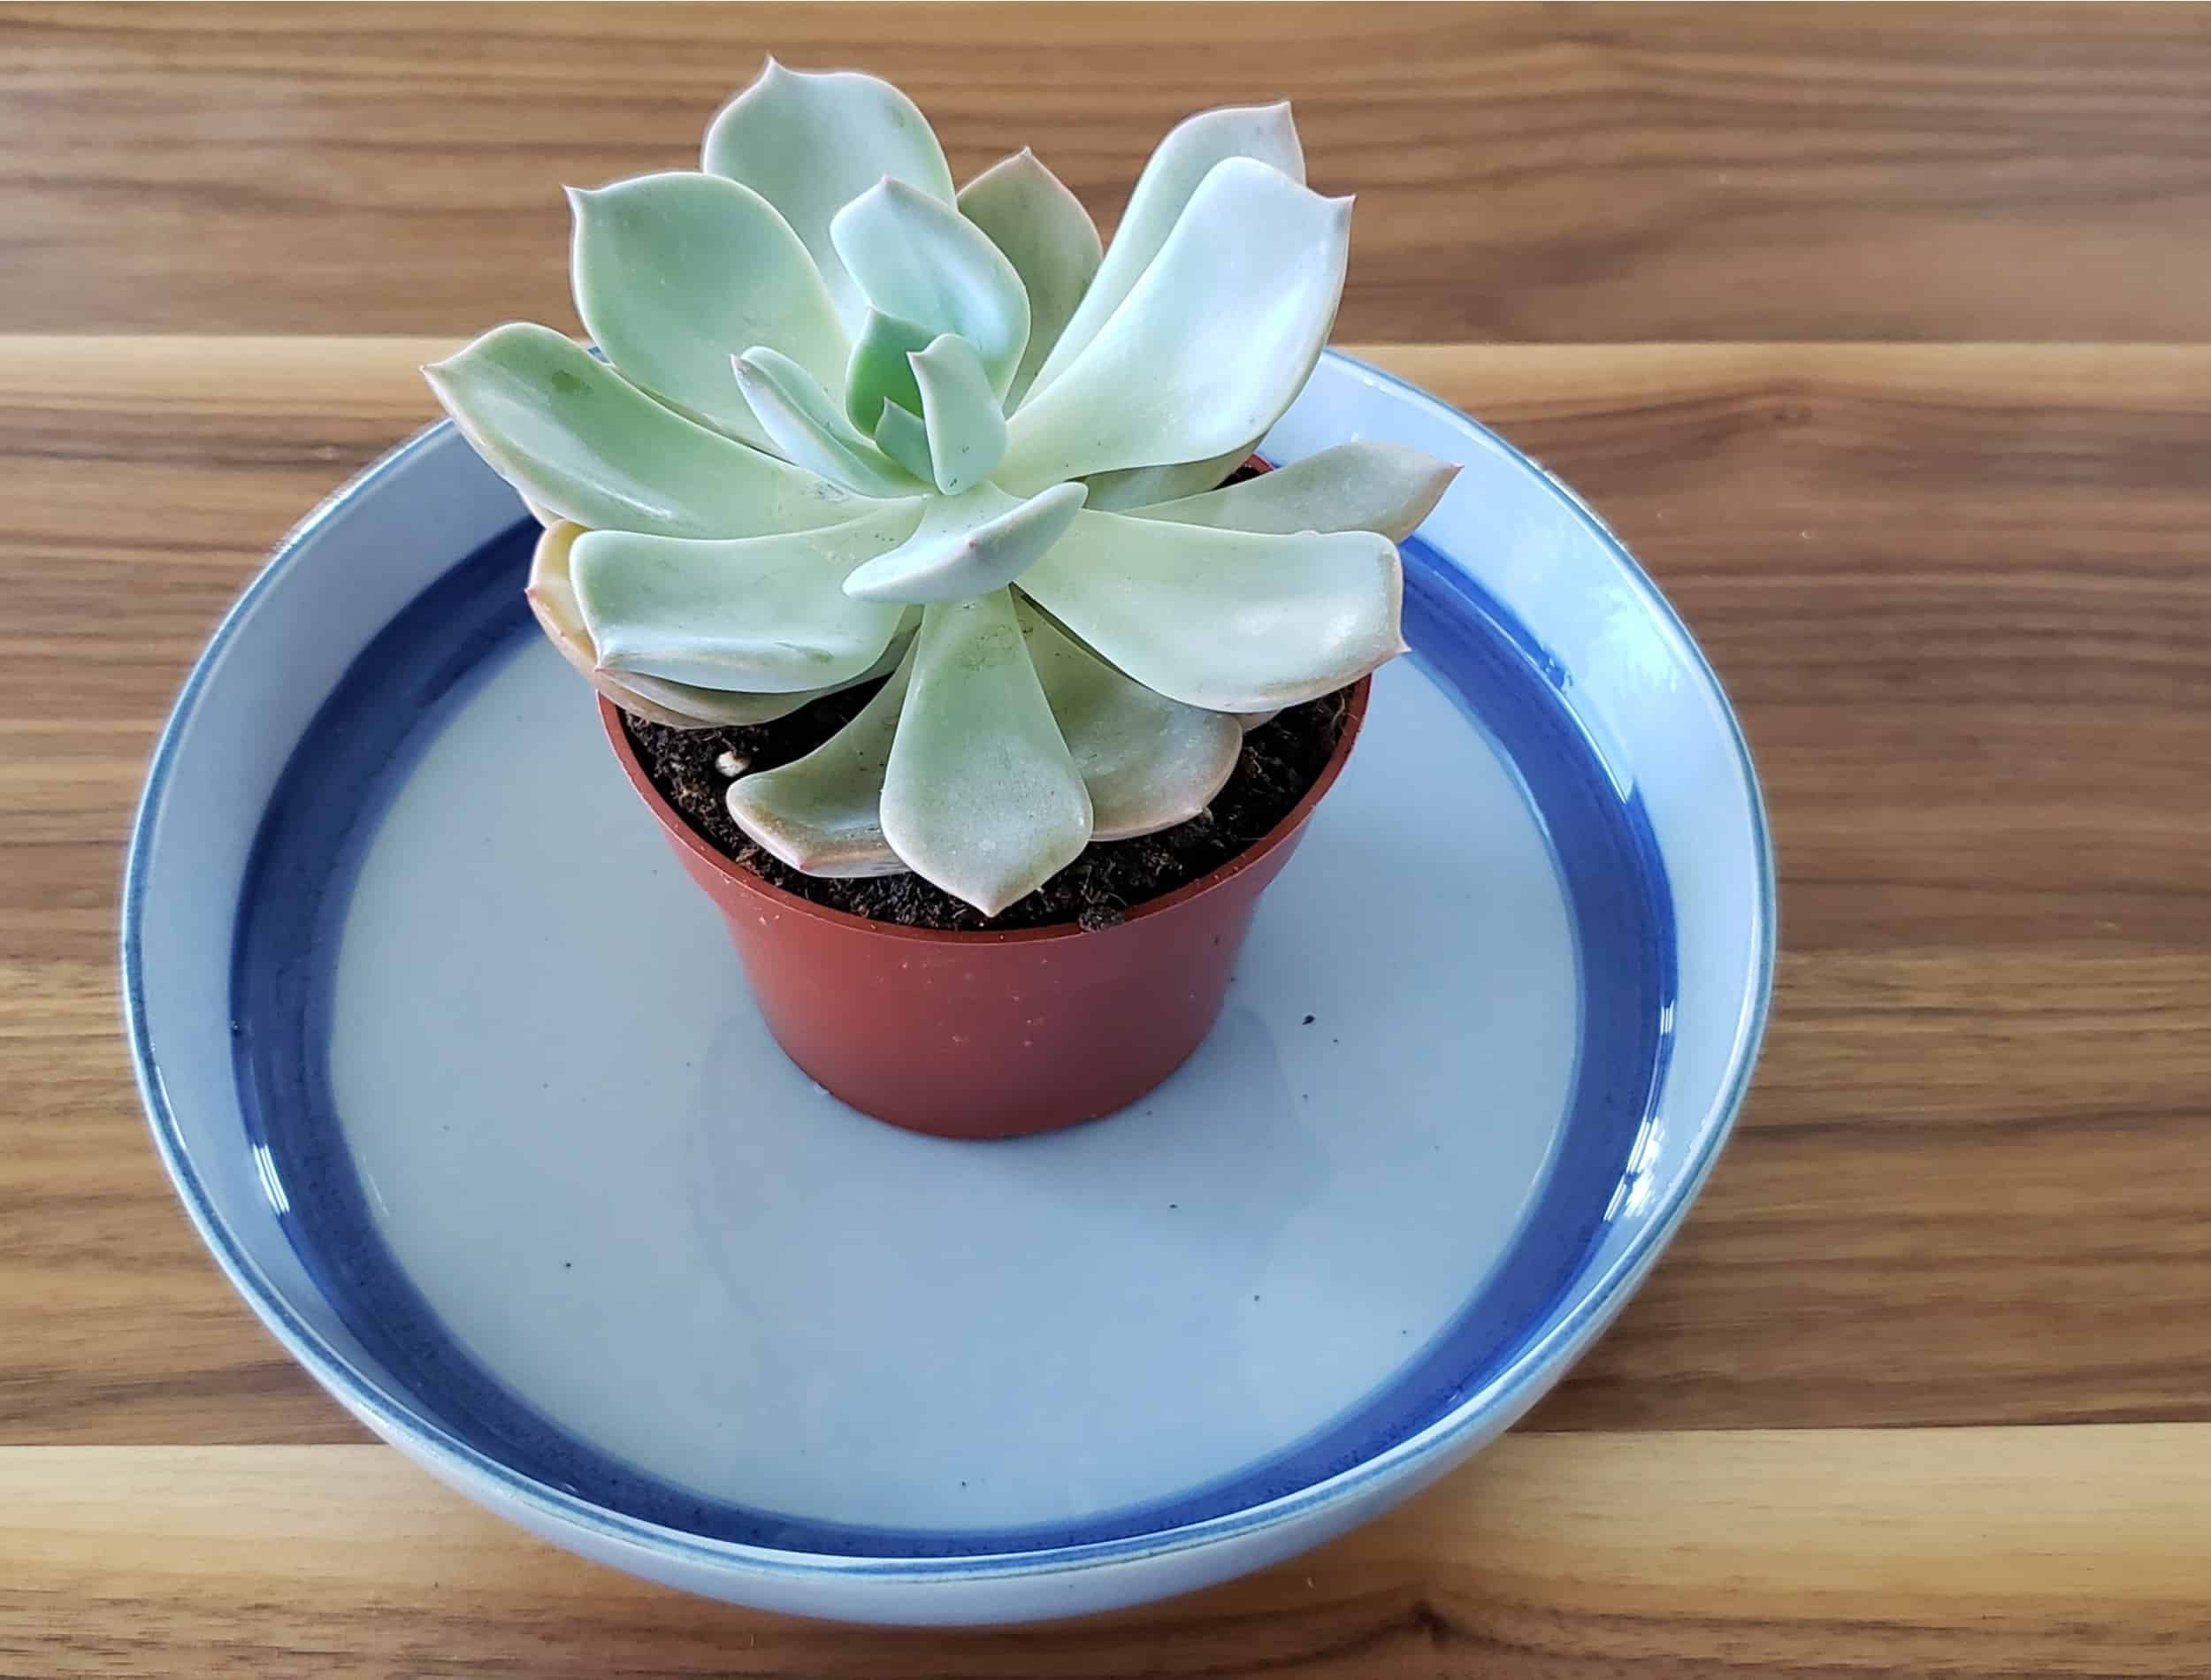 A light-green succulent on a blue bowl-plate bottom watering. This is the preferred watering technique for gardeners growing succulents.